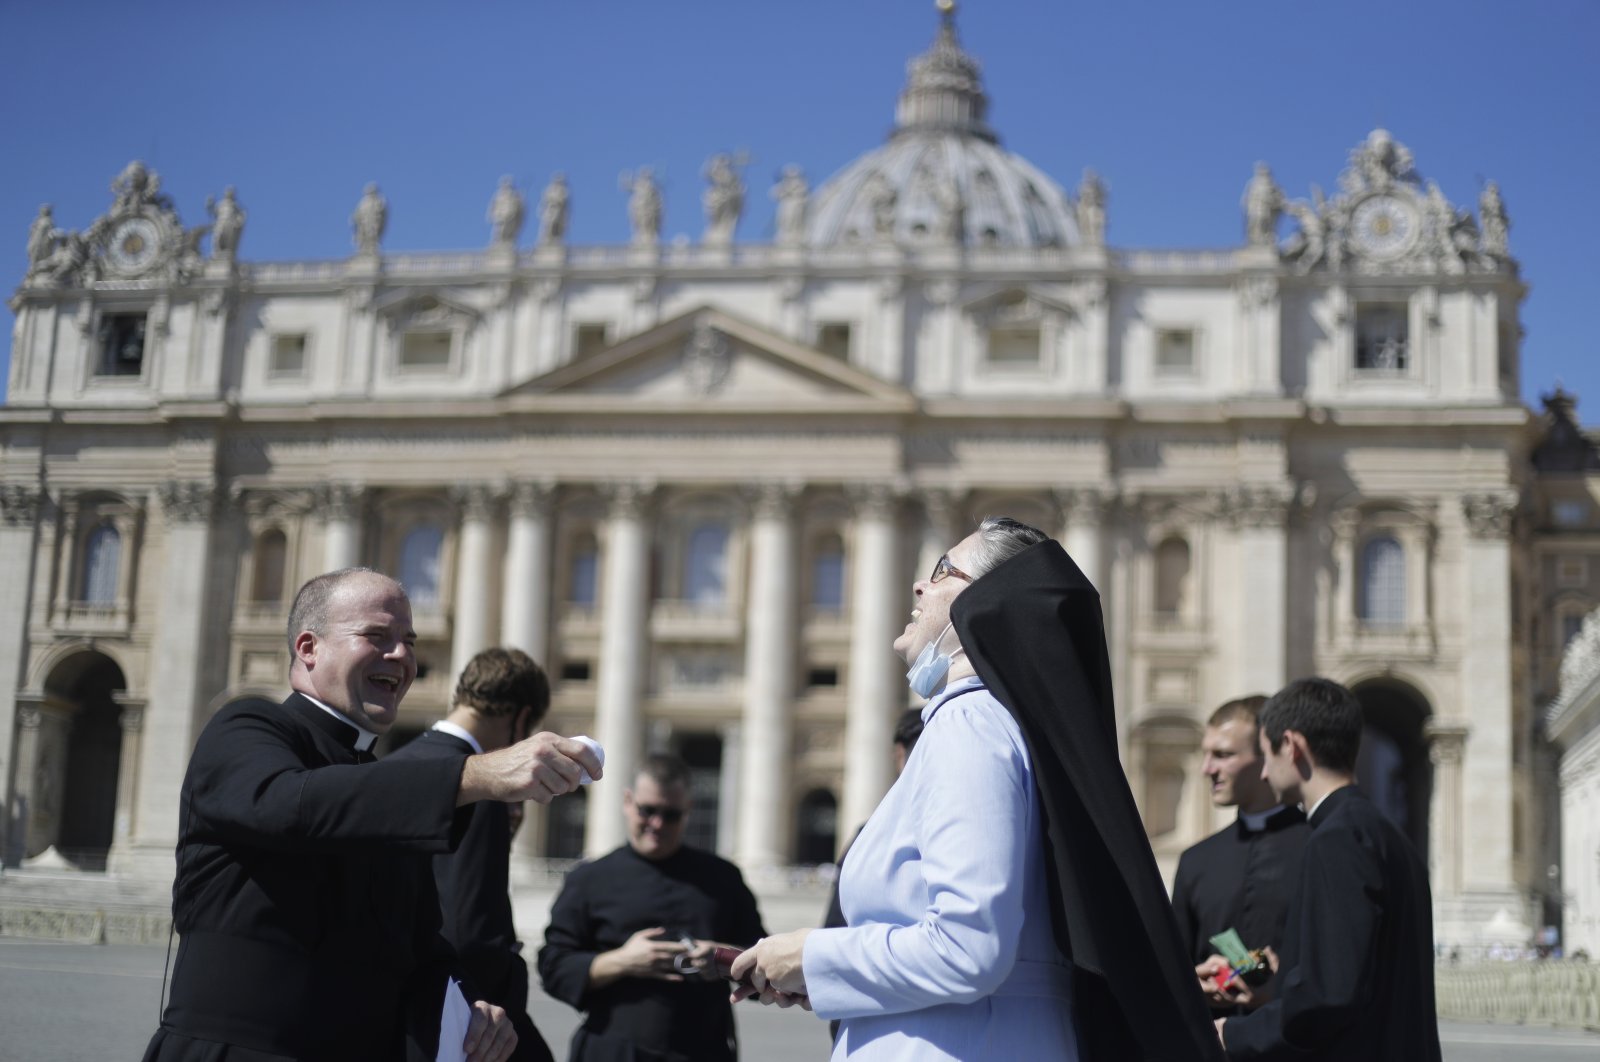 A priest and a nun laugh as they wait for Pope Francis to recite the Angelus noon prayer, in St. Peter's Square at the Vatican, Sept. 6, 2020. (AP Photo)